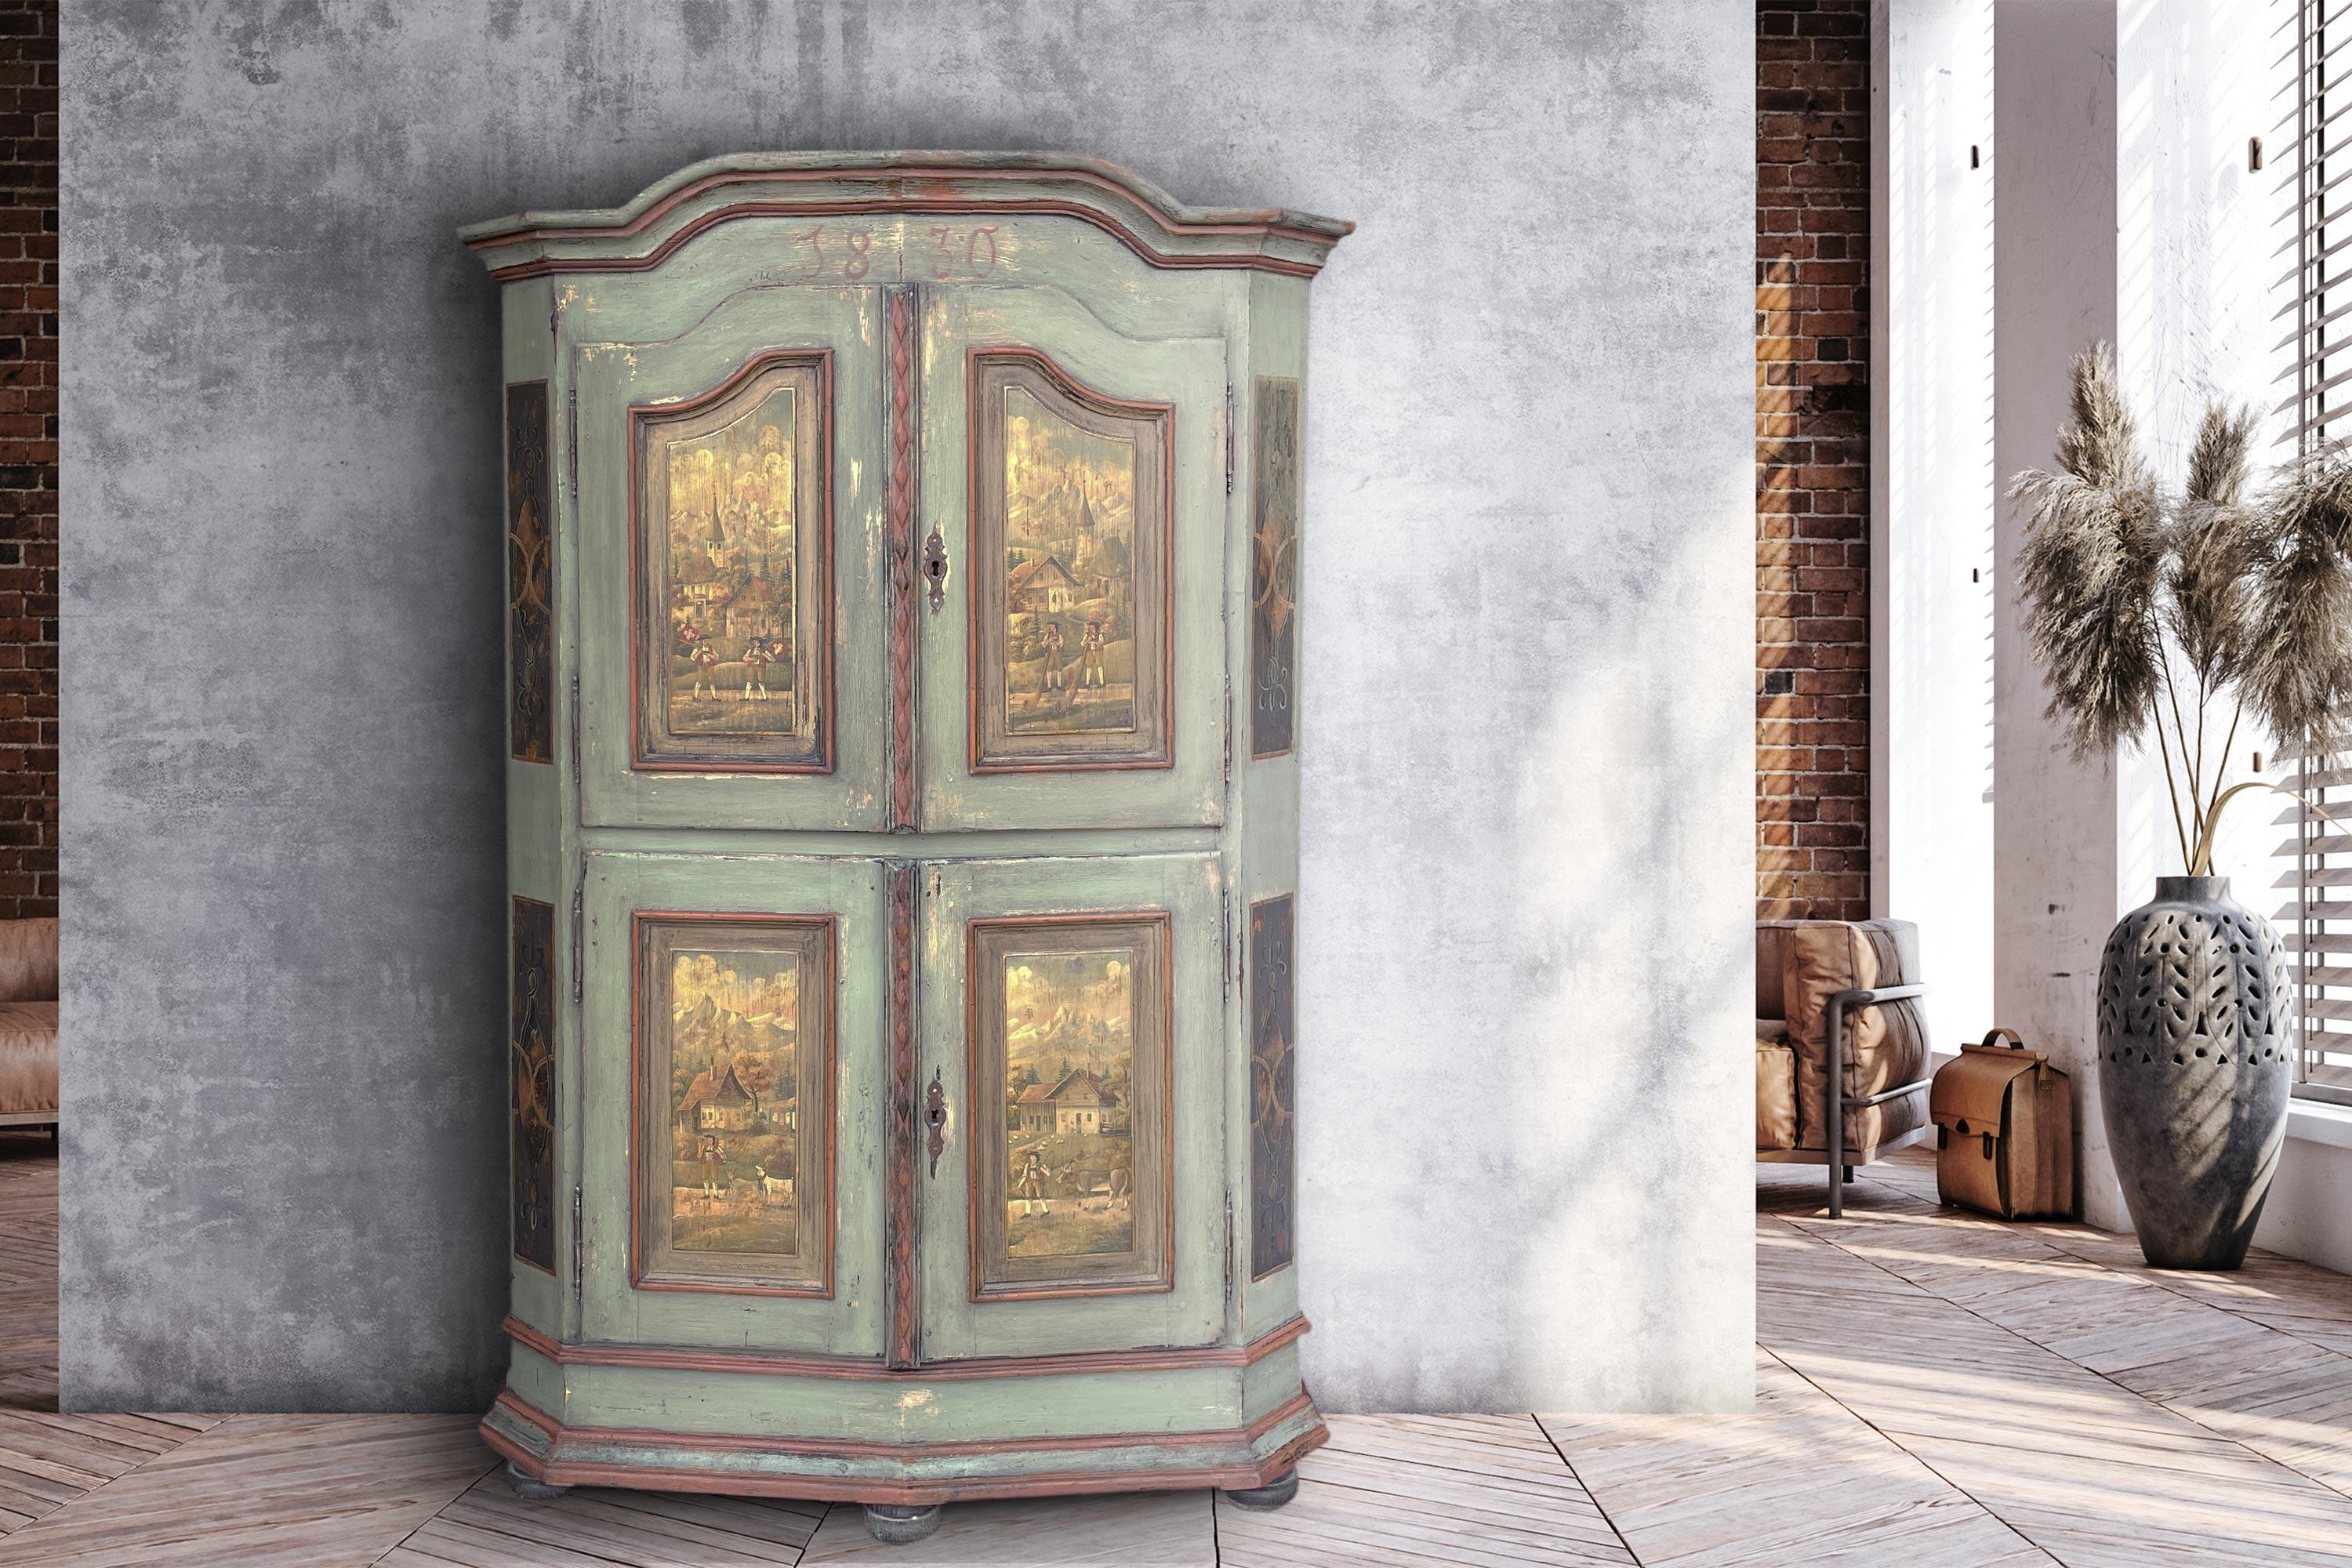 Green painted wardrobe dated 1830

Dimension: H. 175 cm – W. 111 cm (122 to the frames)  – D. 51 cm (56 to the frames) 
Era: 1830 (dated)
Provenience: Switzerland
Essence: Fir

Item description

Antique wardrobe entirely painted in sage green.
It is